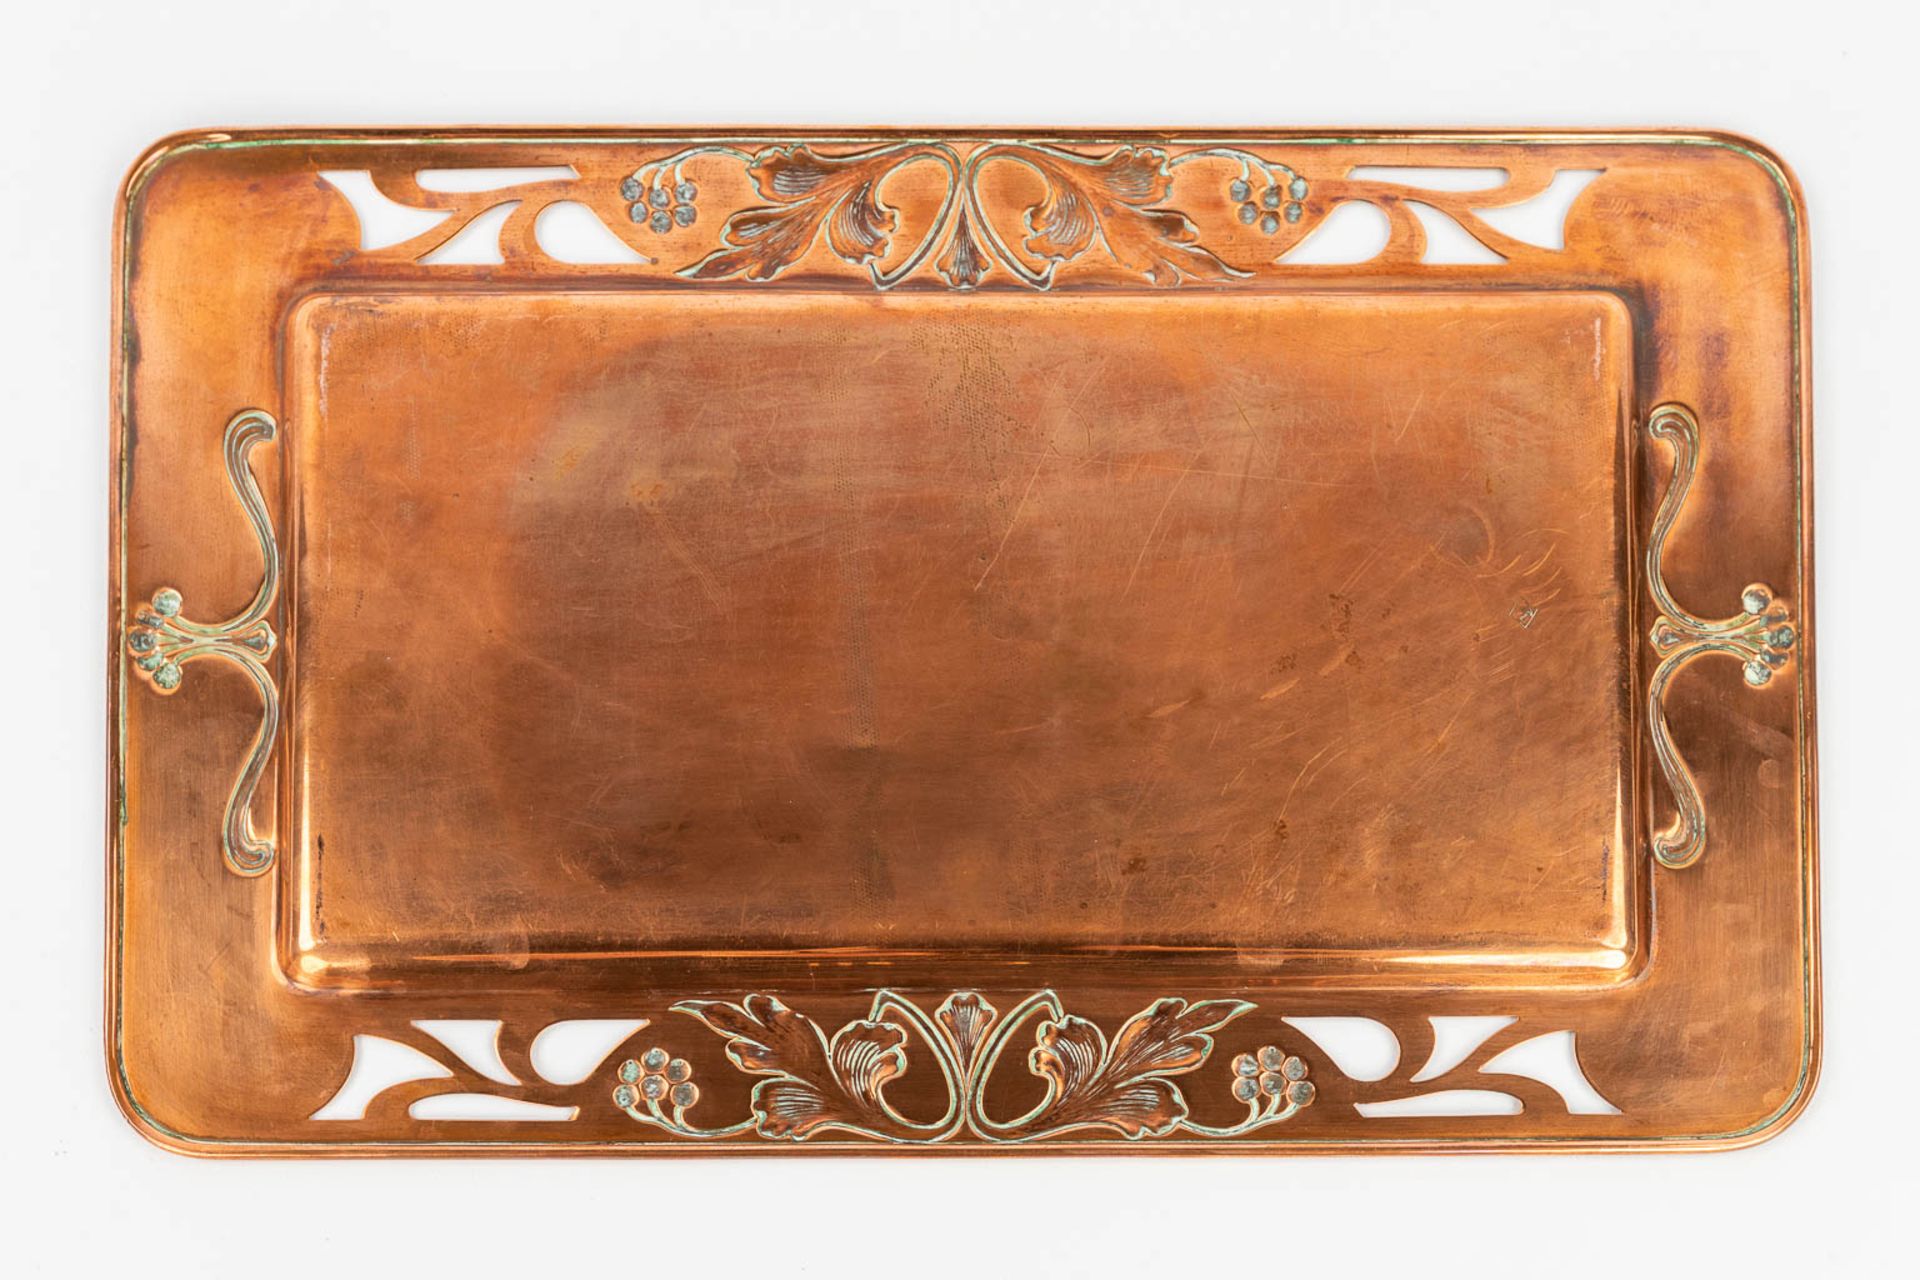 A collection of trays and table accessories made of copper in art nouveau style (L:43 x W:27 cm) - Bild 15 aus 17